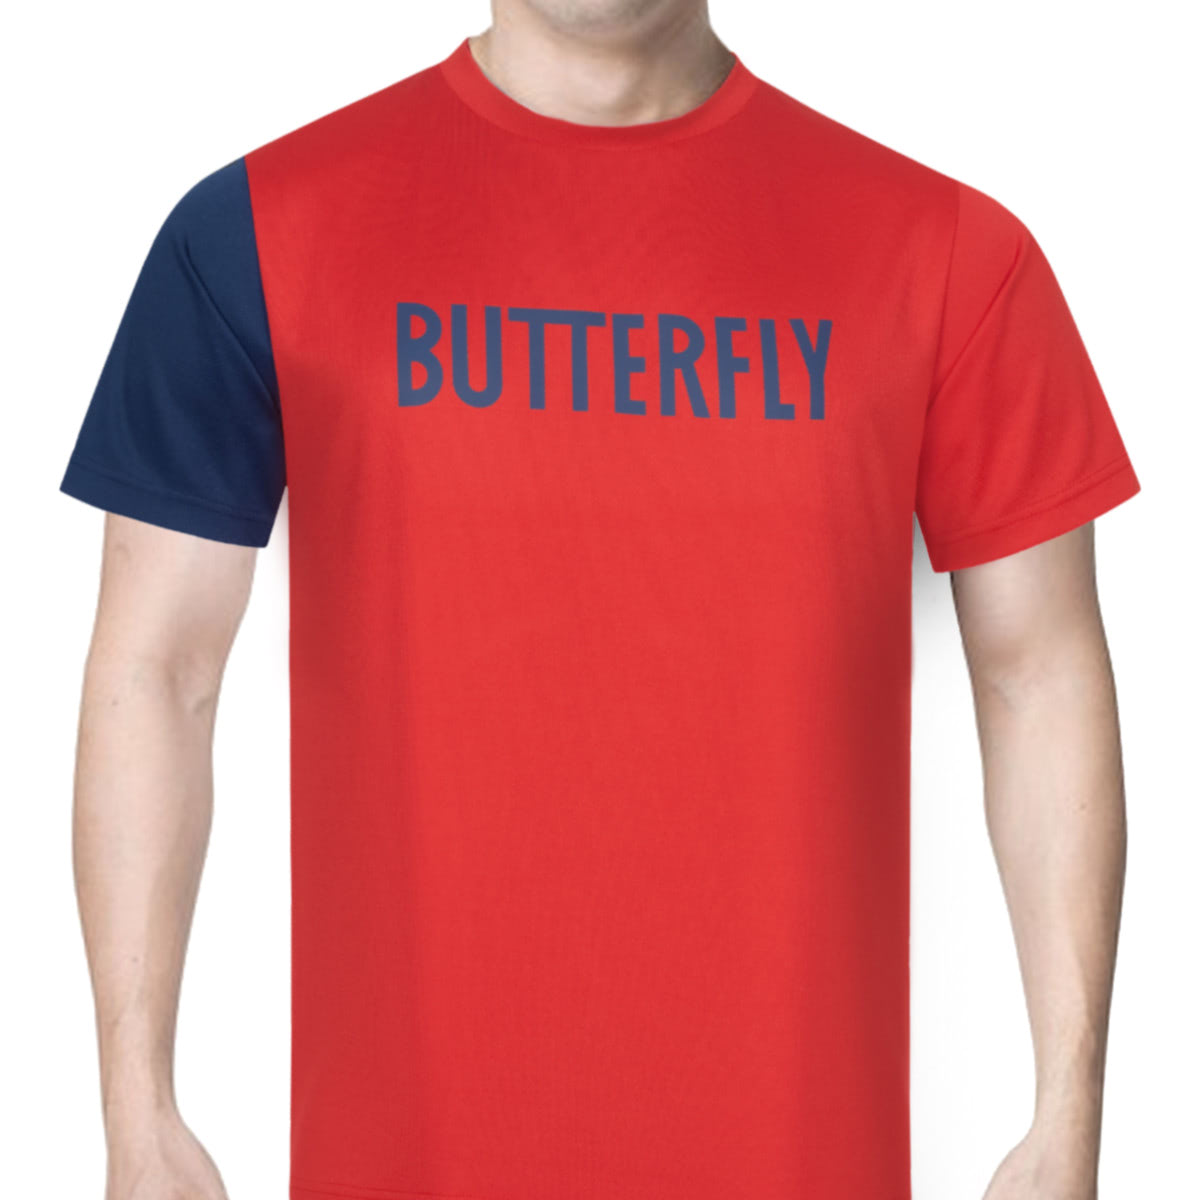 Butterfly USA Team 23 Practice Shirt - Megaspin